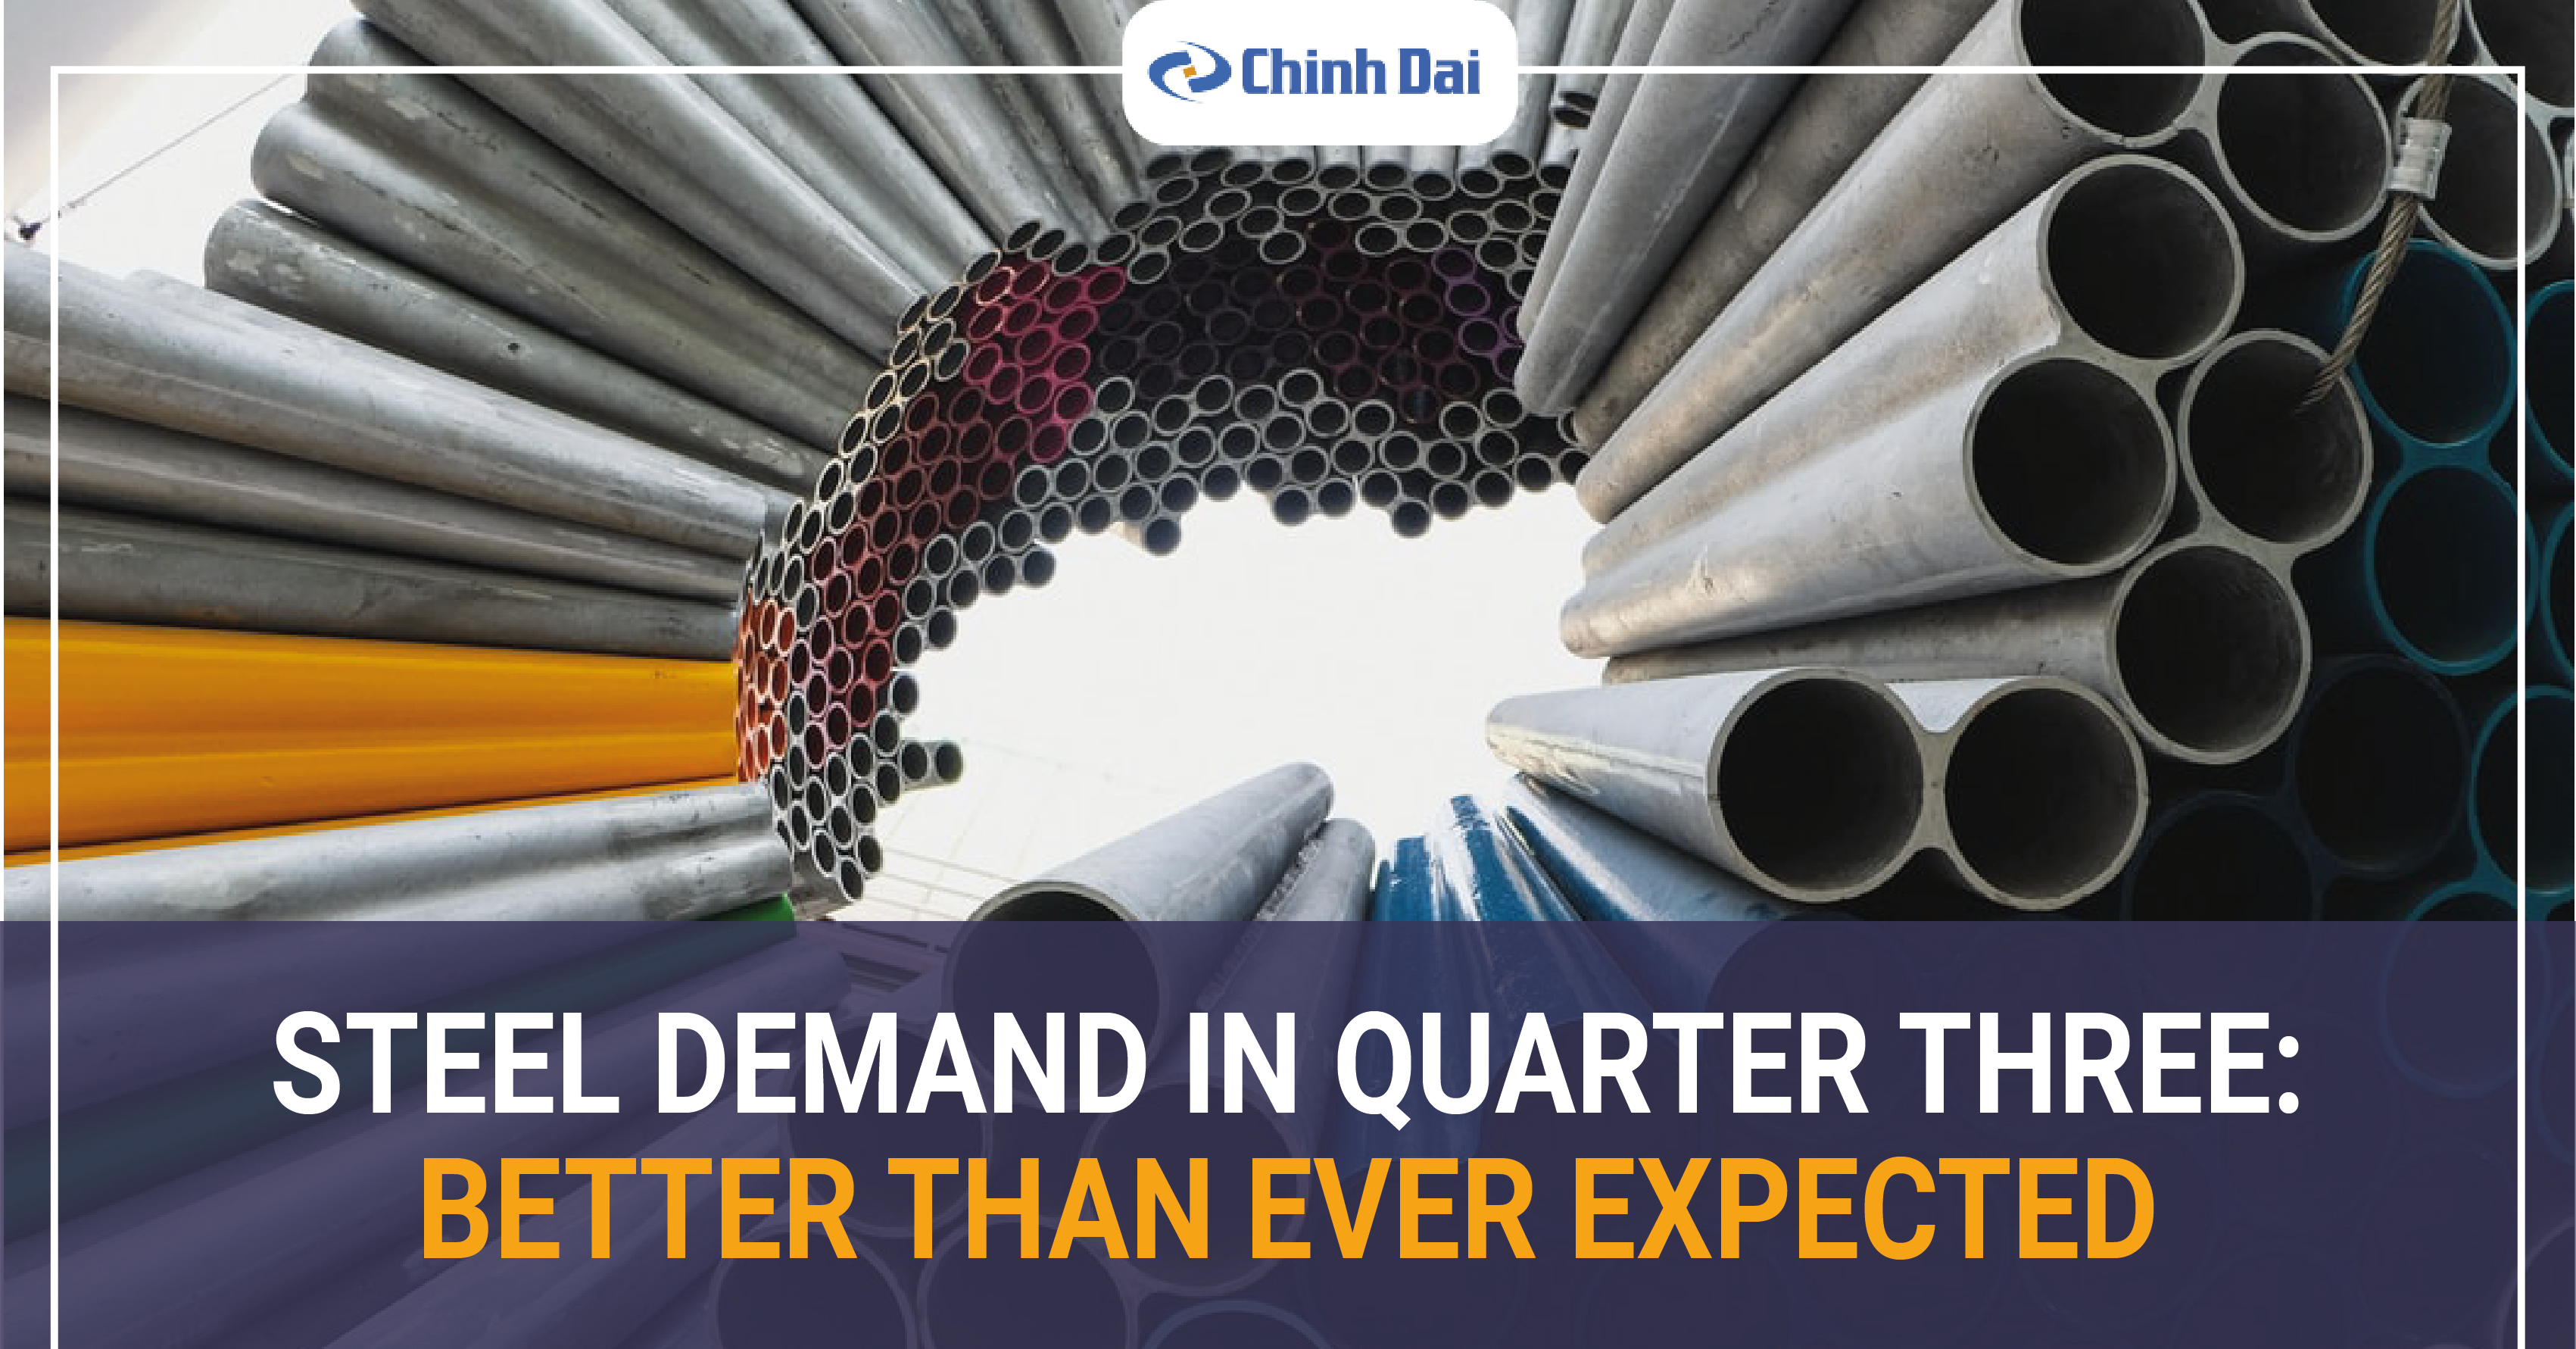 Steel demand in Q3: Better than expected